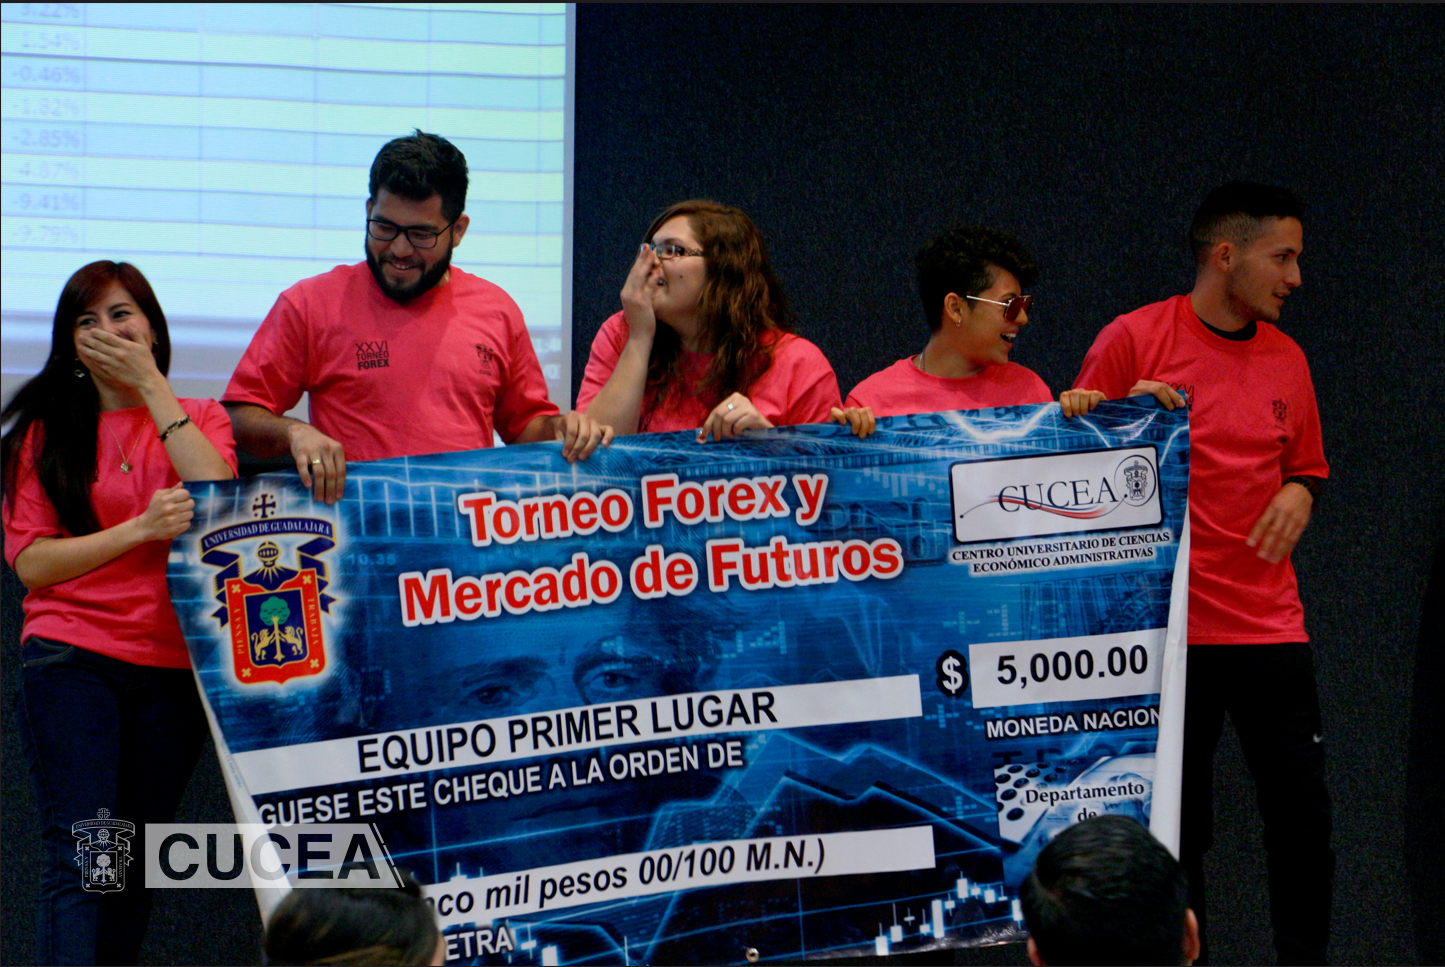 Torneo forex cucea 2014 gmc empire state ipo